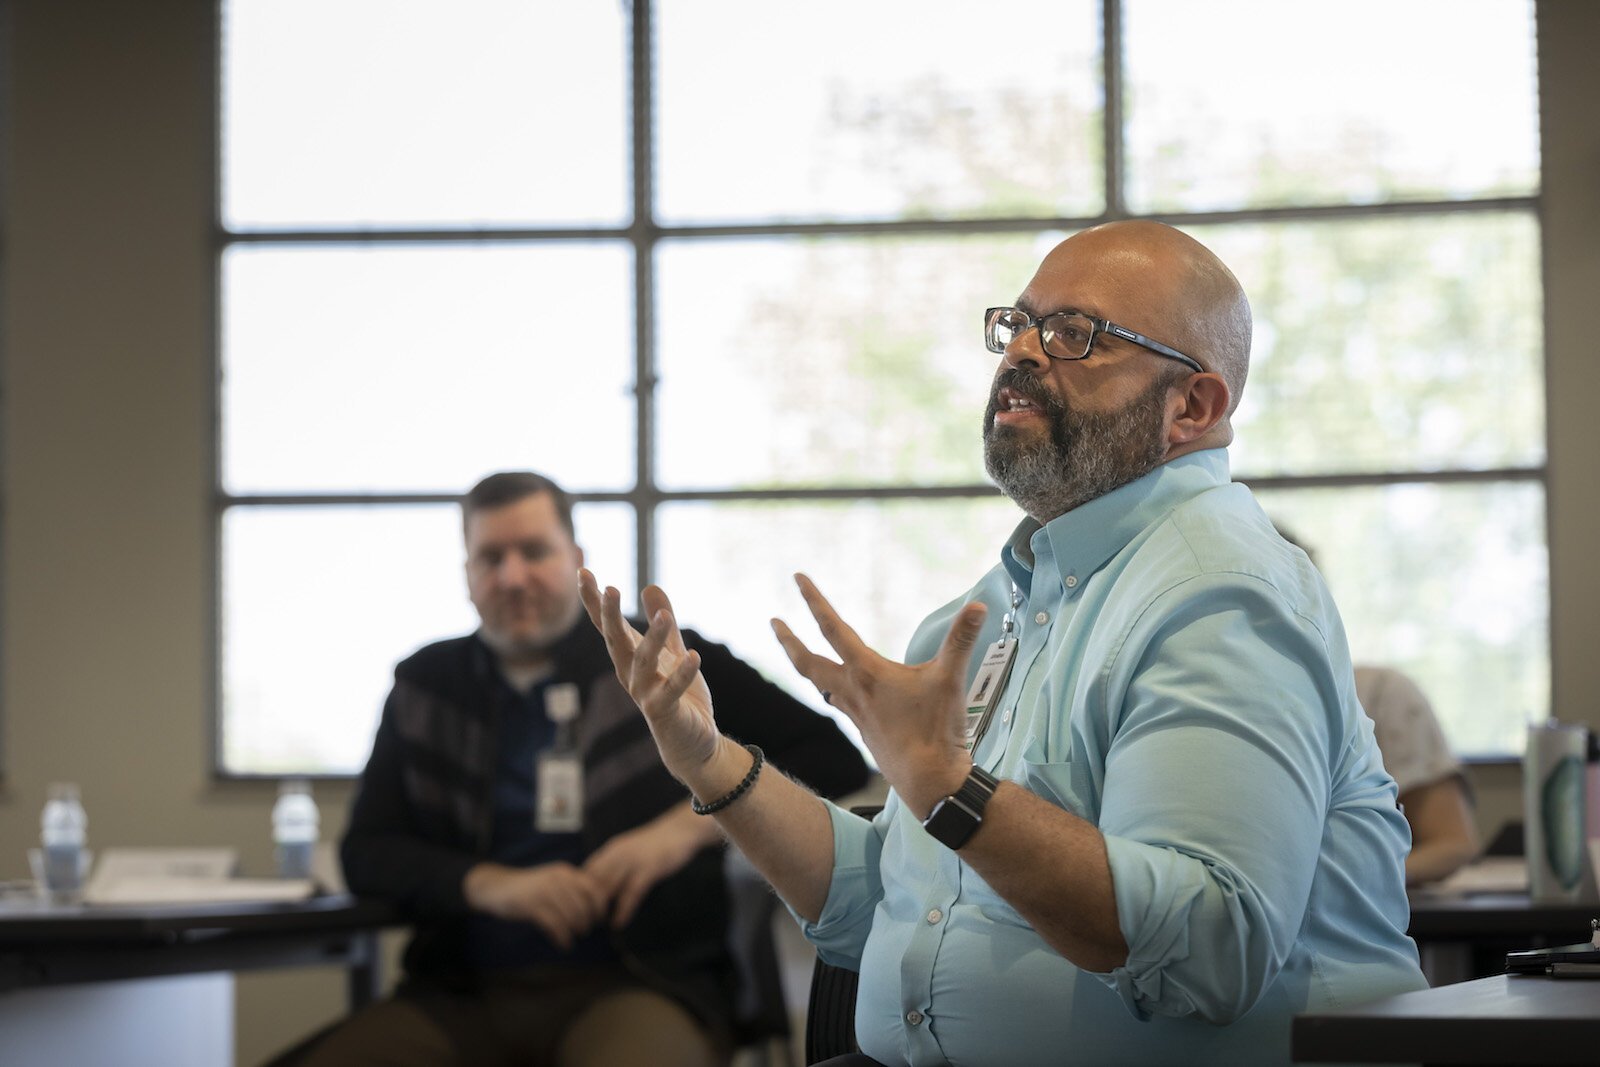 The L.E.A.D. Executive Certificate program is designed to help business managers who want to build inclusivity and equity in their organizations, but don’t know how to make change happen.